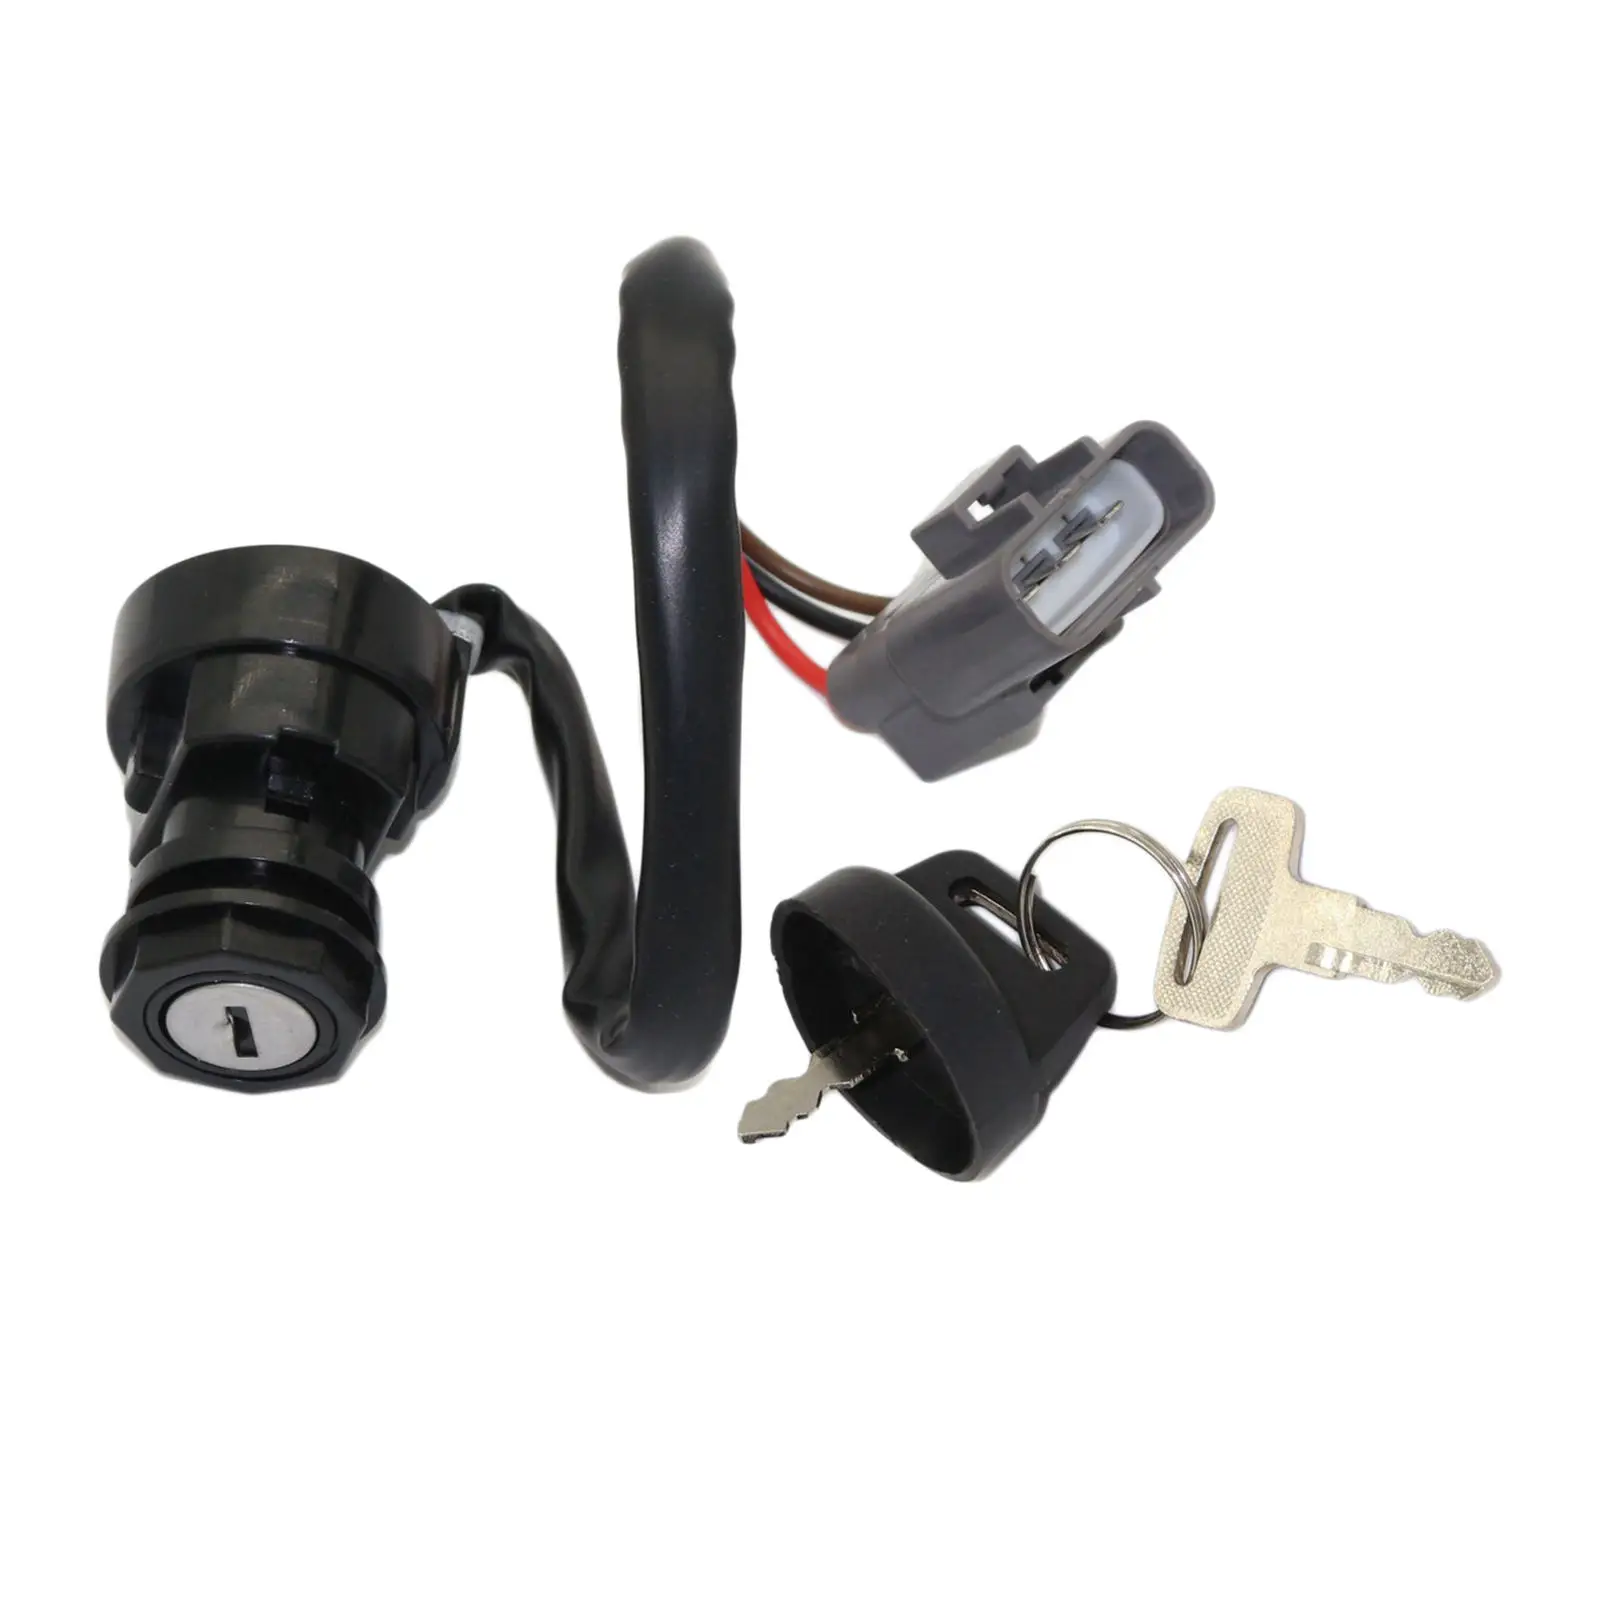 Ignition Key Switch Replacements Fits for Yamaha  660 YFM660 2002 2003 04 05 06 07 08 ATV